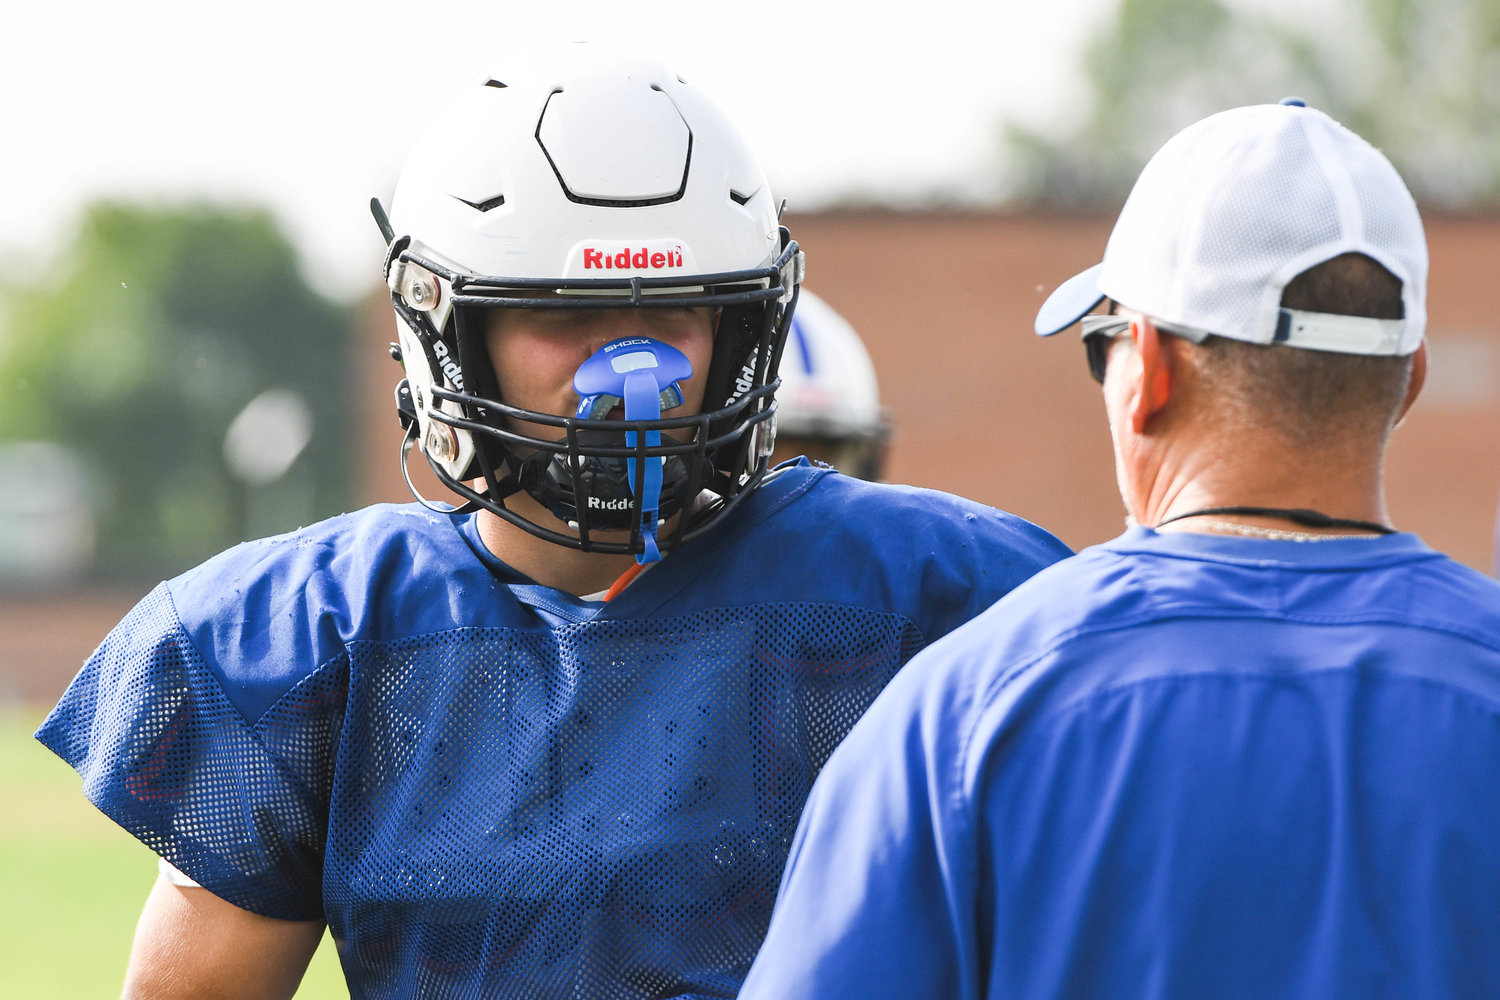 Dolgeville running back Jared Bilinski talks with head coach Daniel Zilkowski before running plays during a morning practice on Aug. 25.